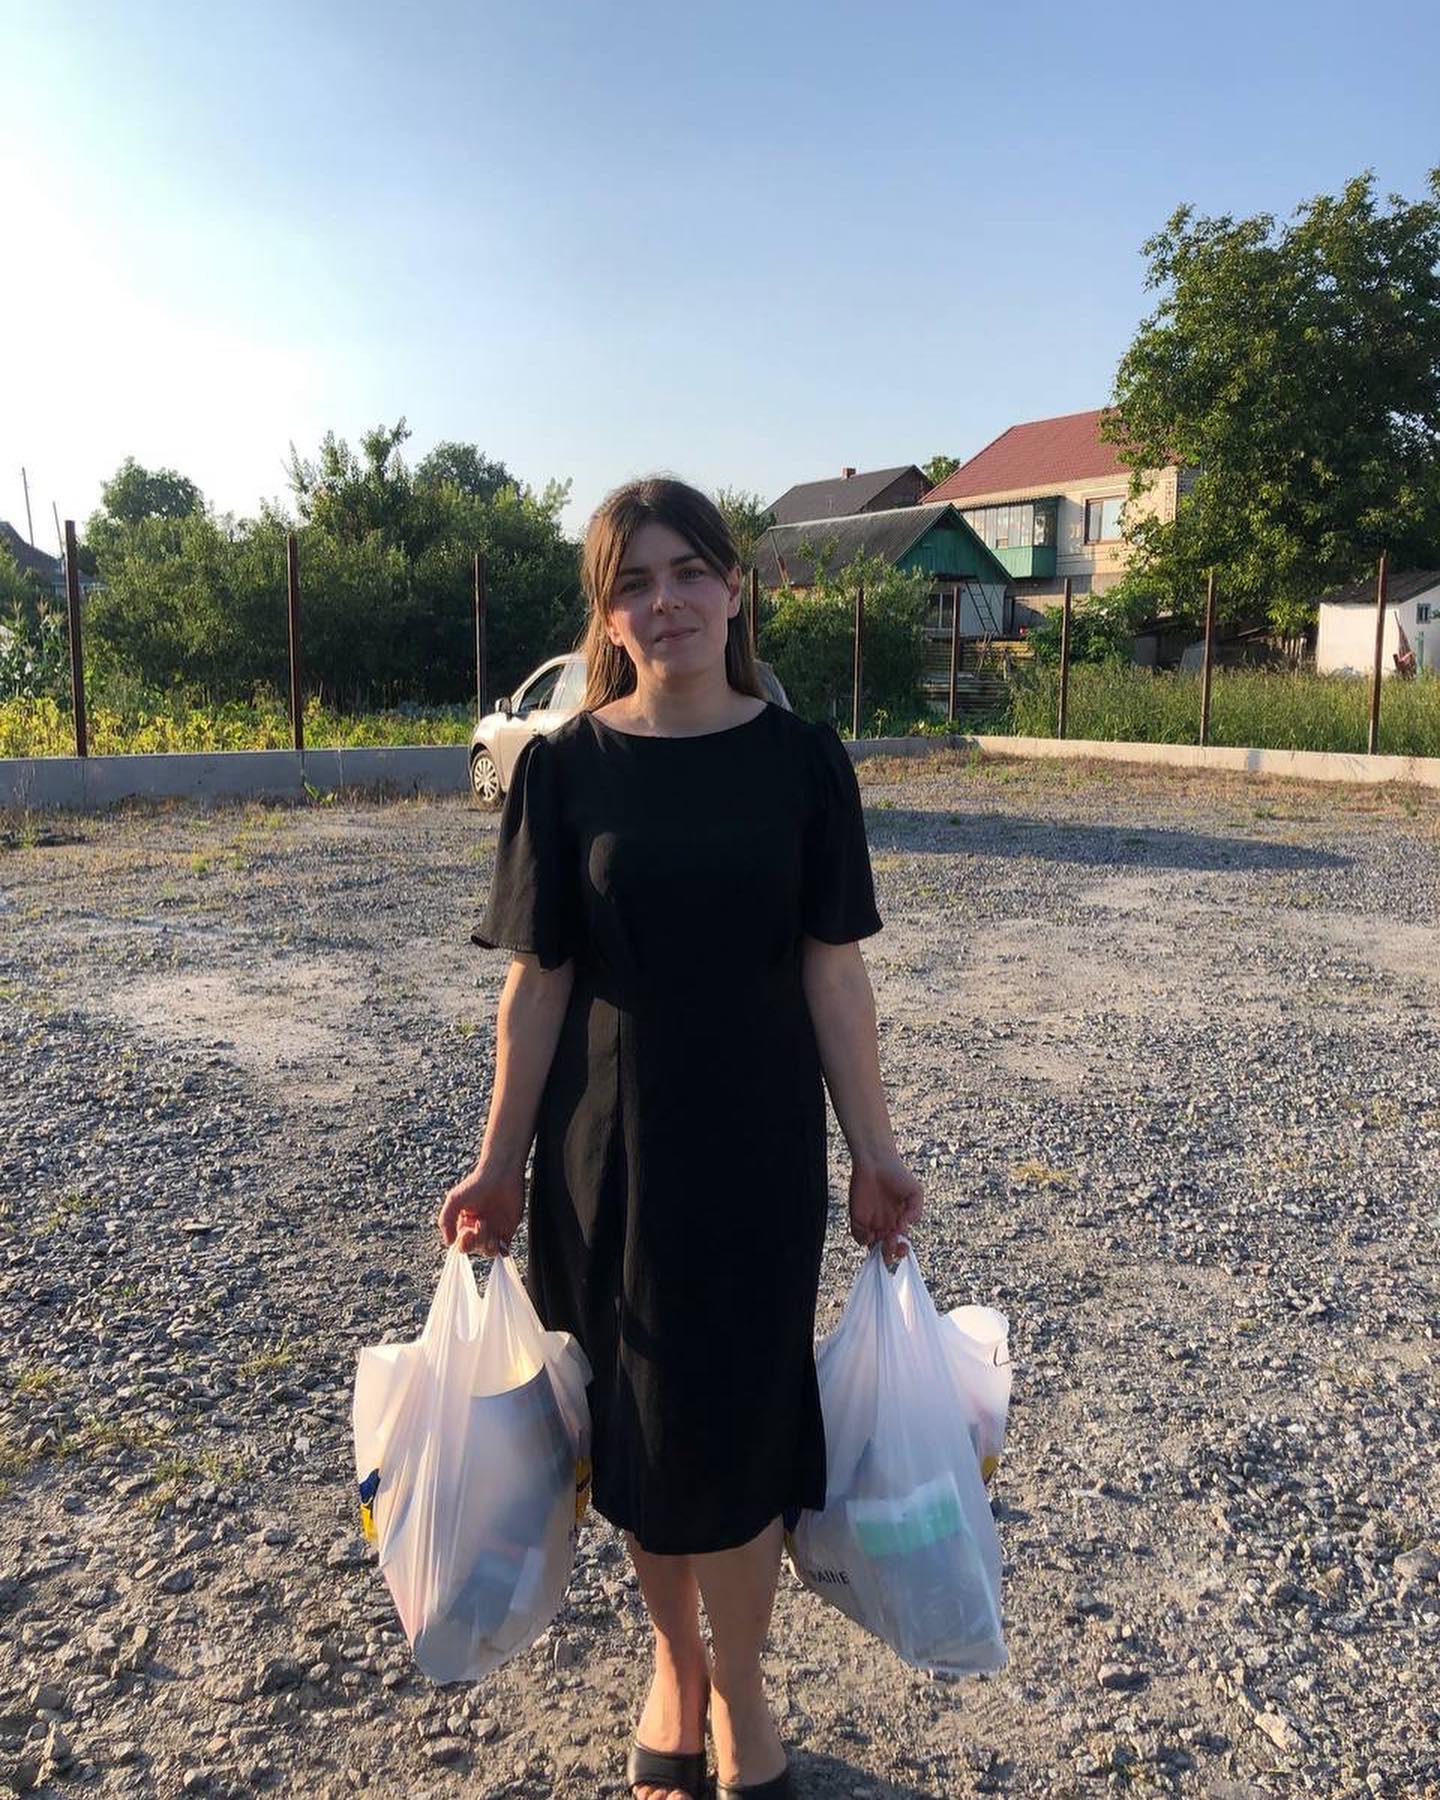 A woman in a black dress holding shopping bags.